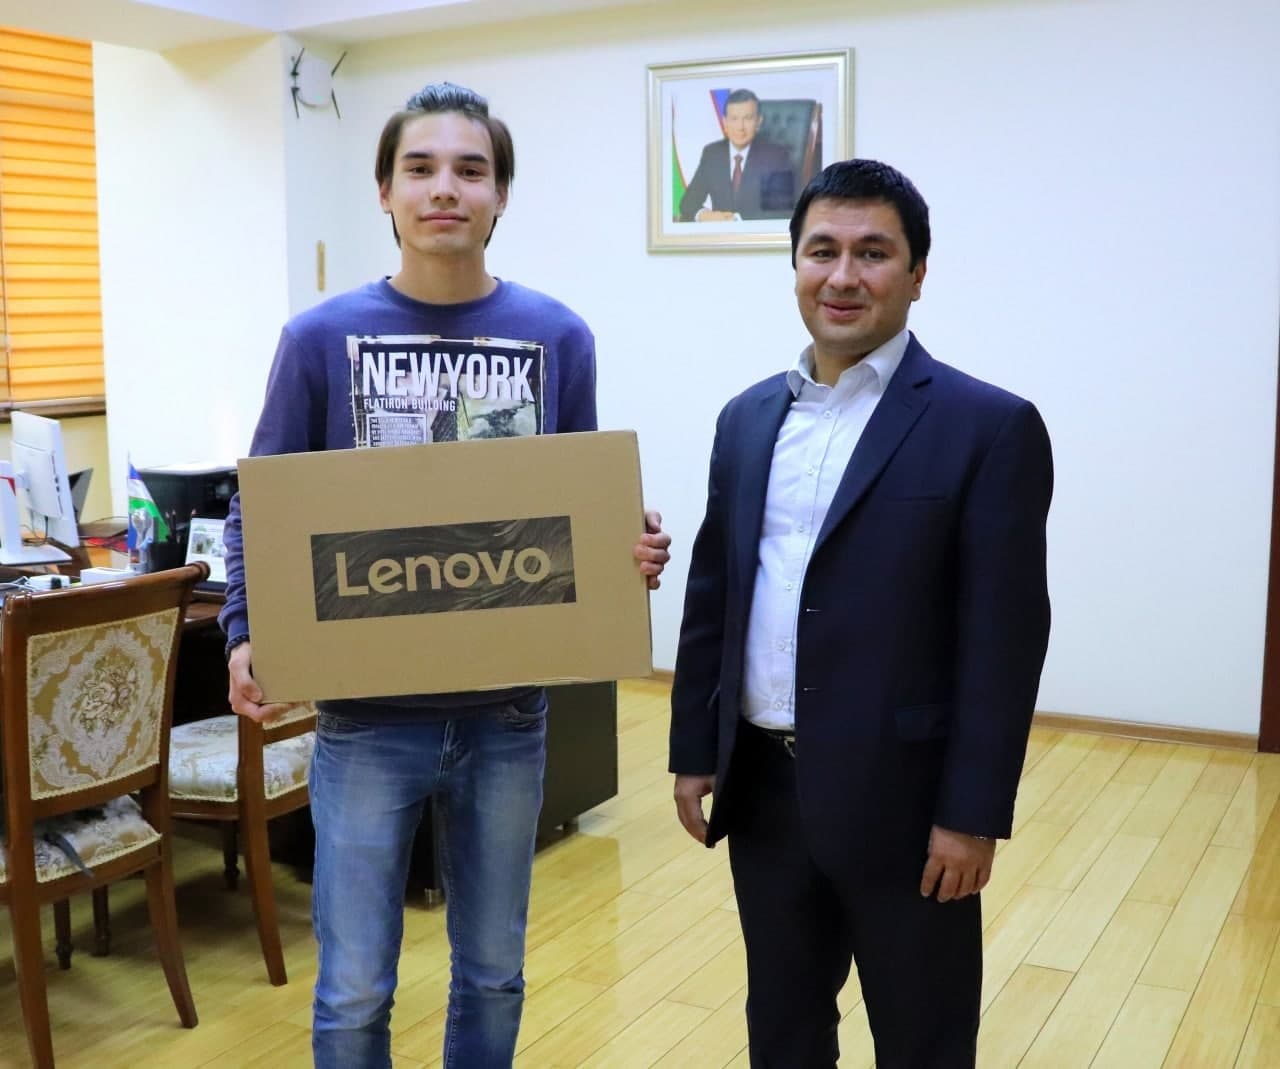 You are currently viewing Our student Yuldashev Davronbek, who won through a random selection, received his prize – laptop today!